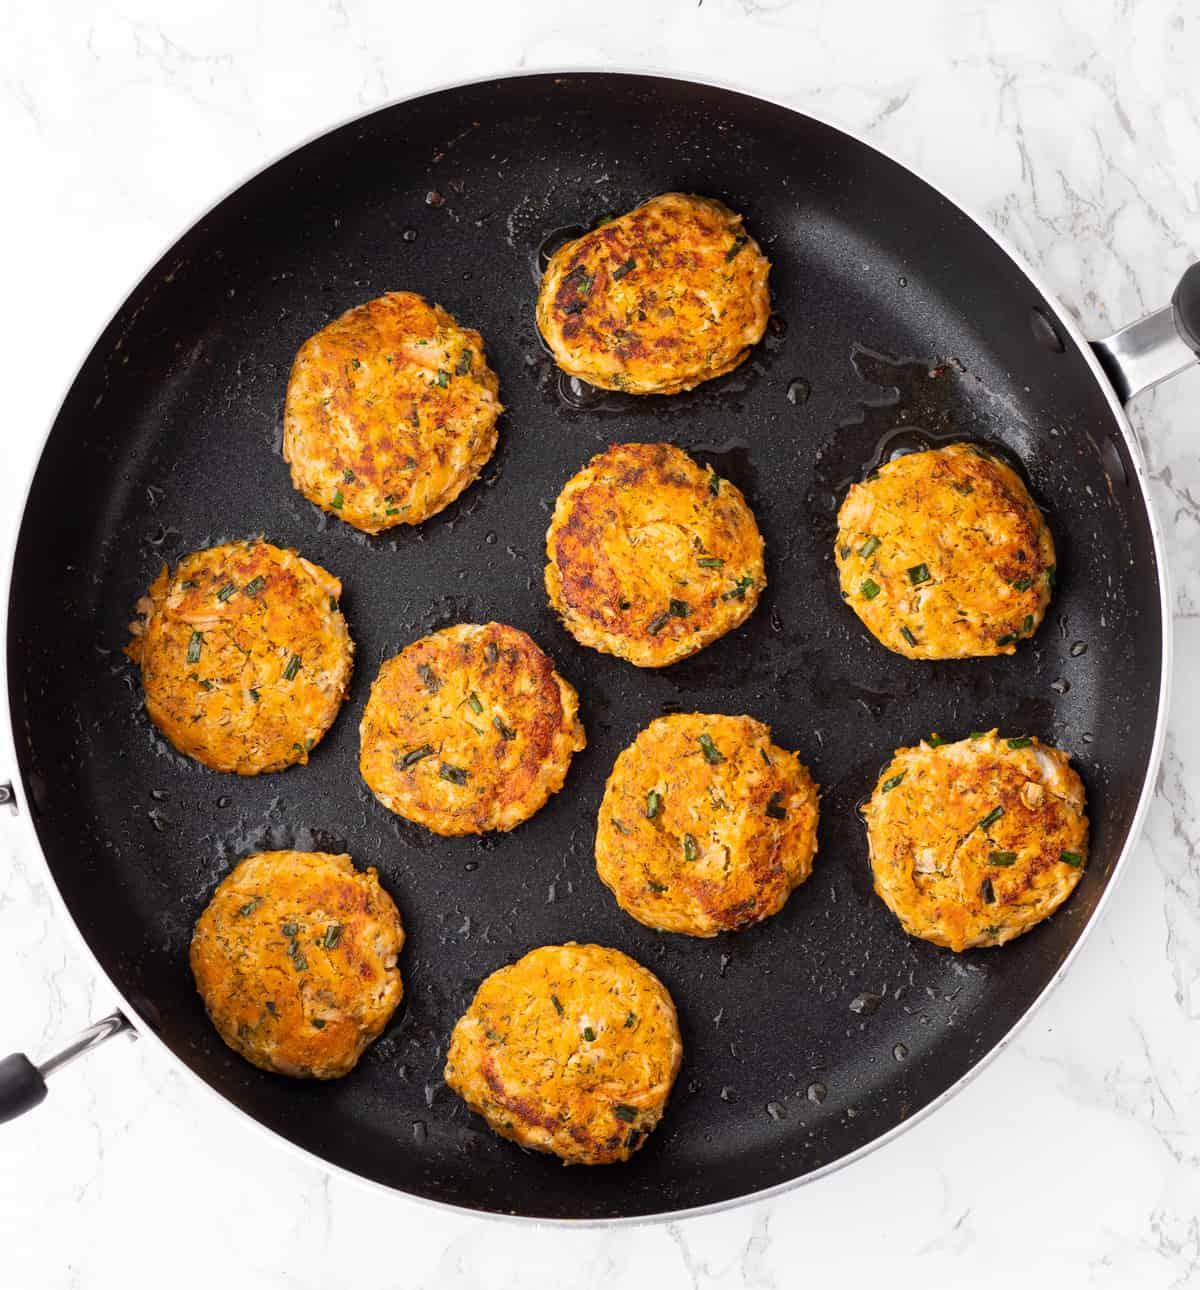 Cooked salmon cakes in a skillet.